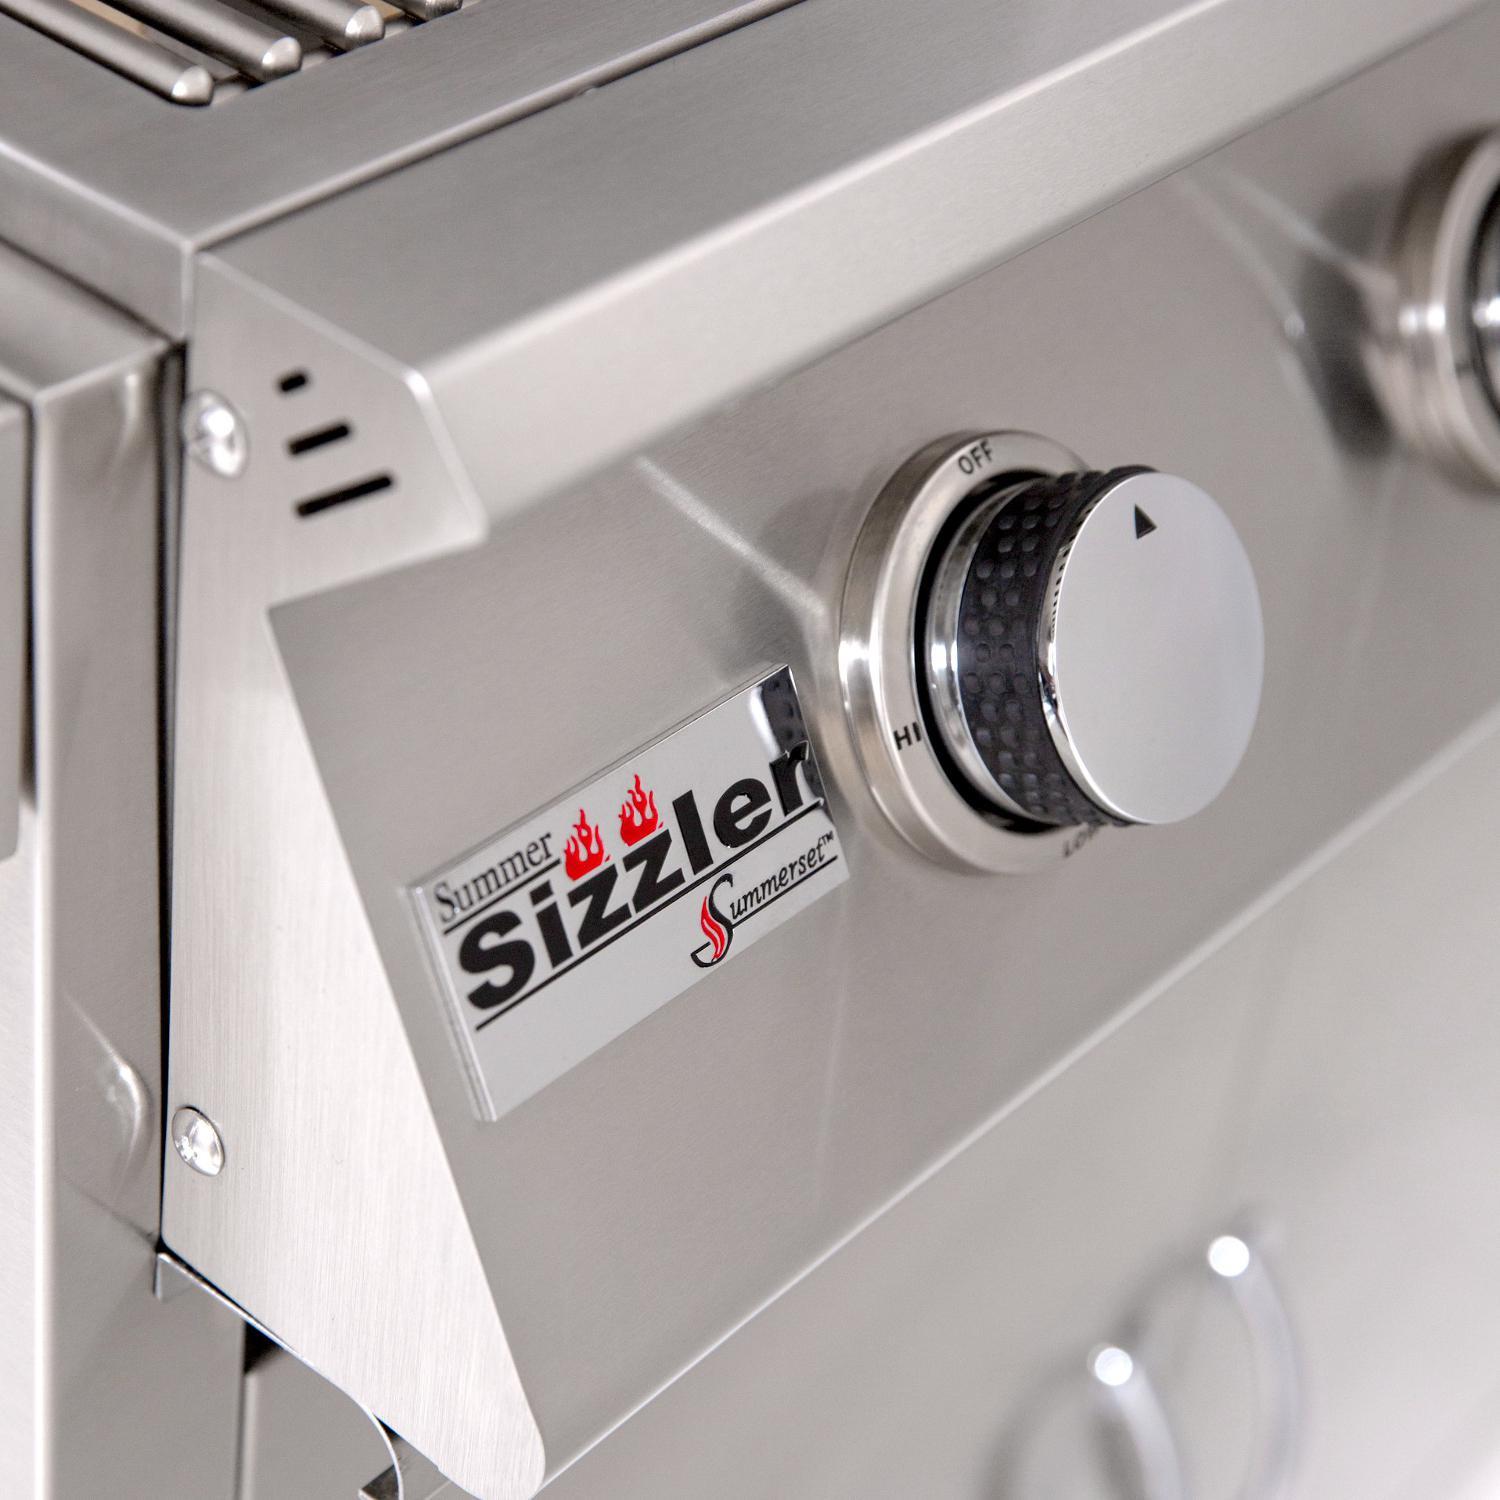 Summerset Grills Grills Sizzler Grill, 32" LP/NG - Built-in